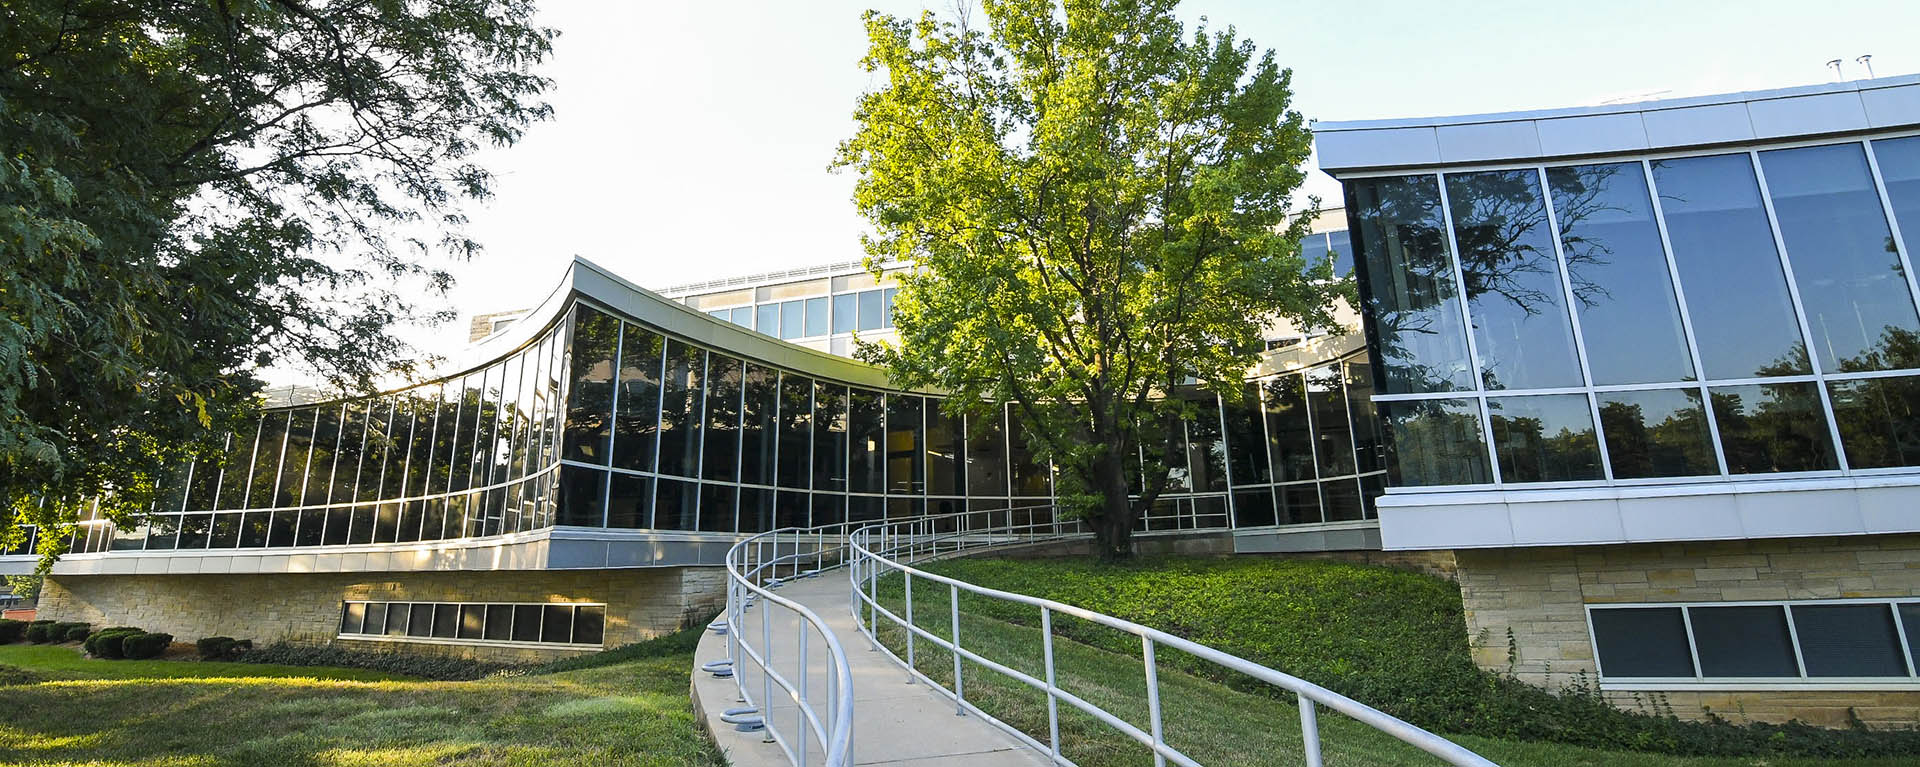 Stoffer Science Hall